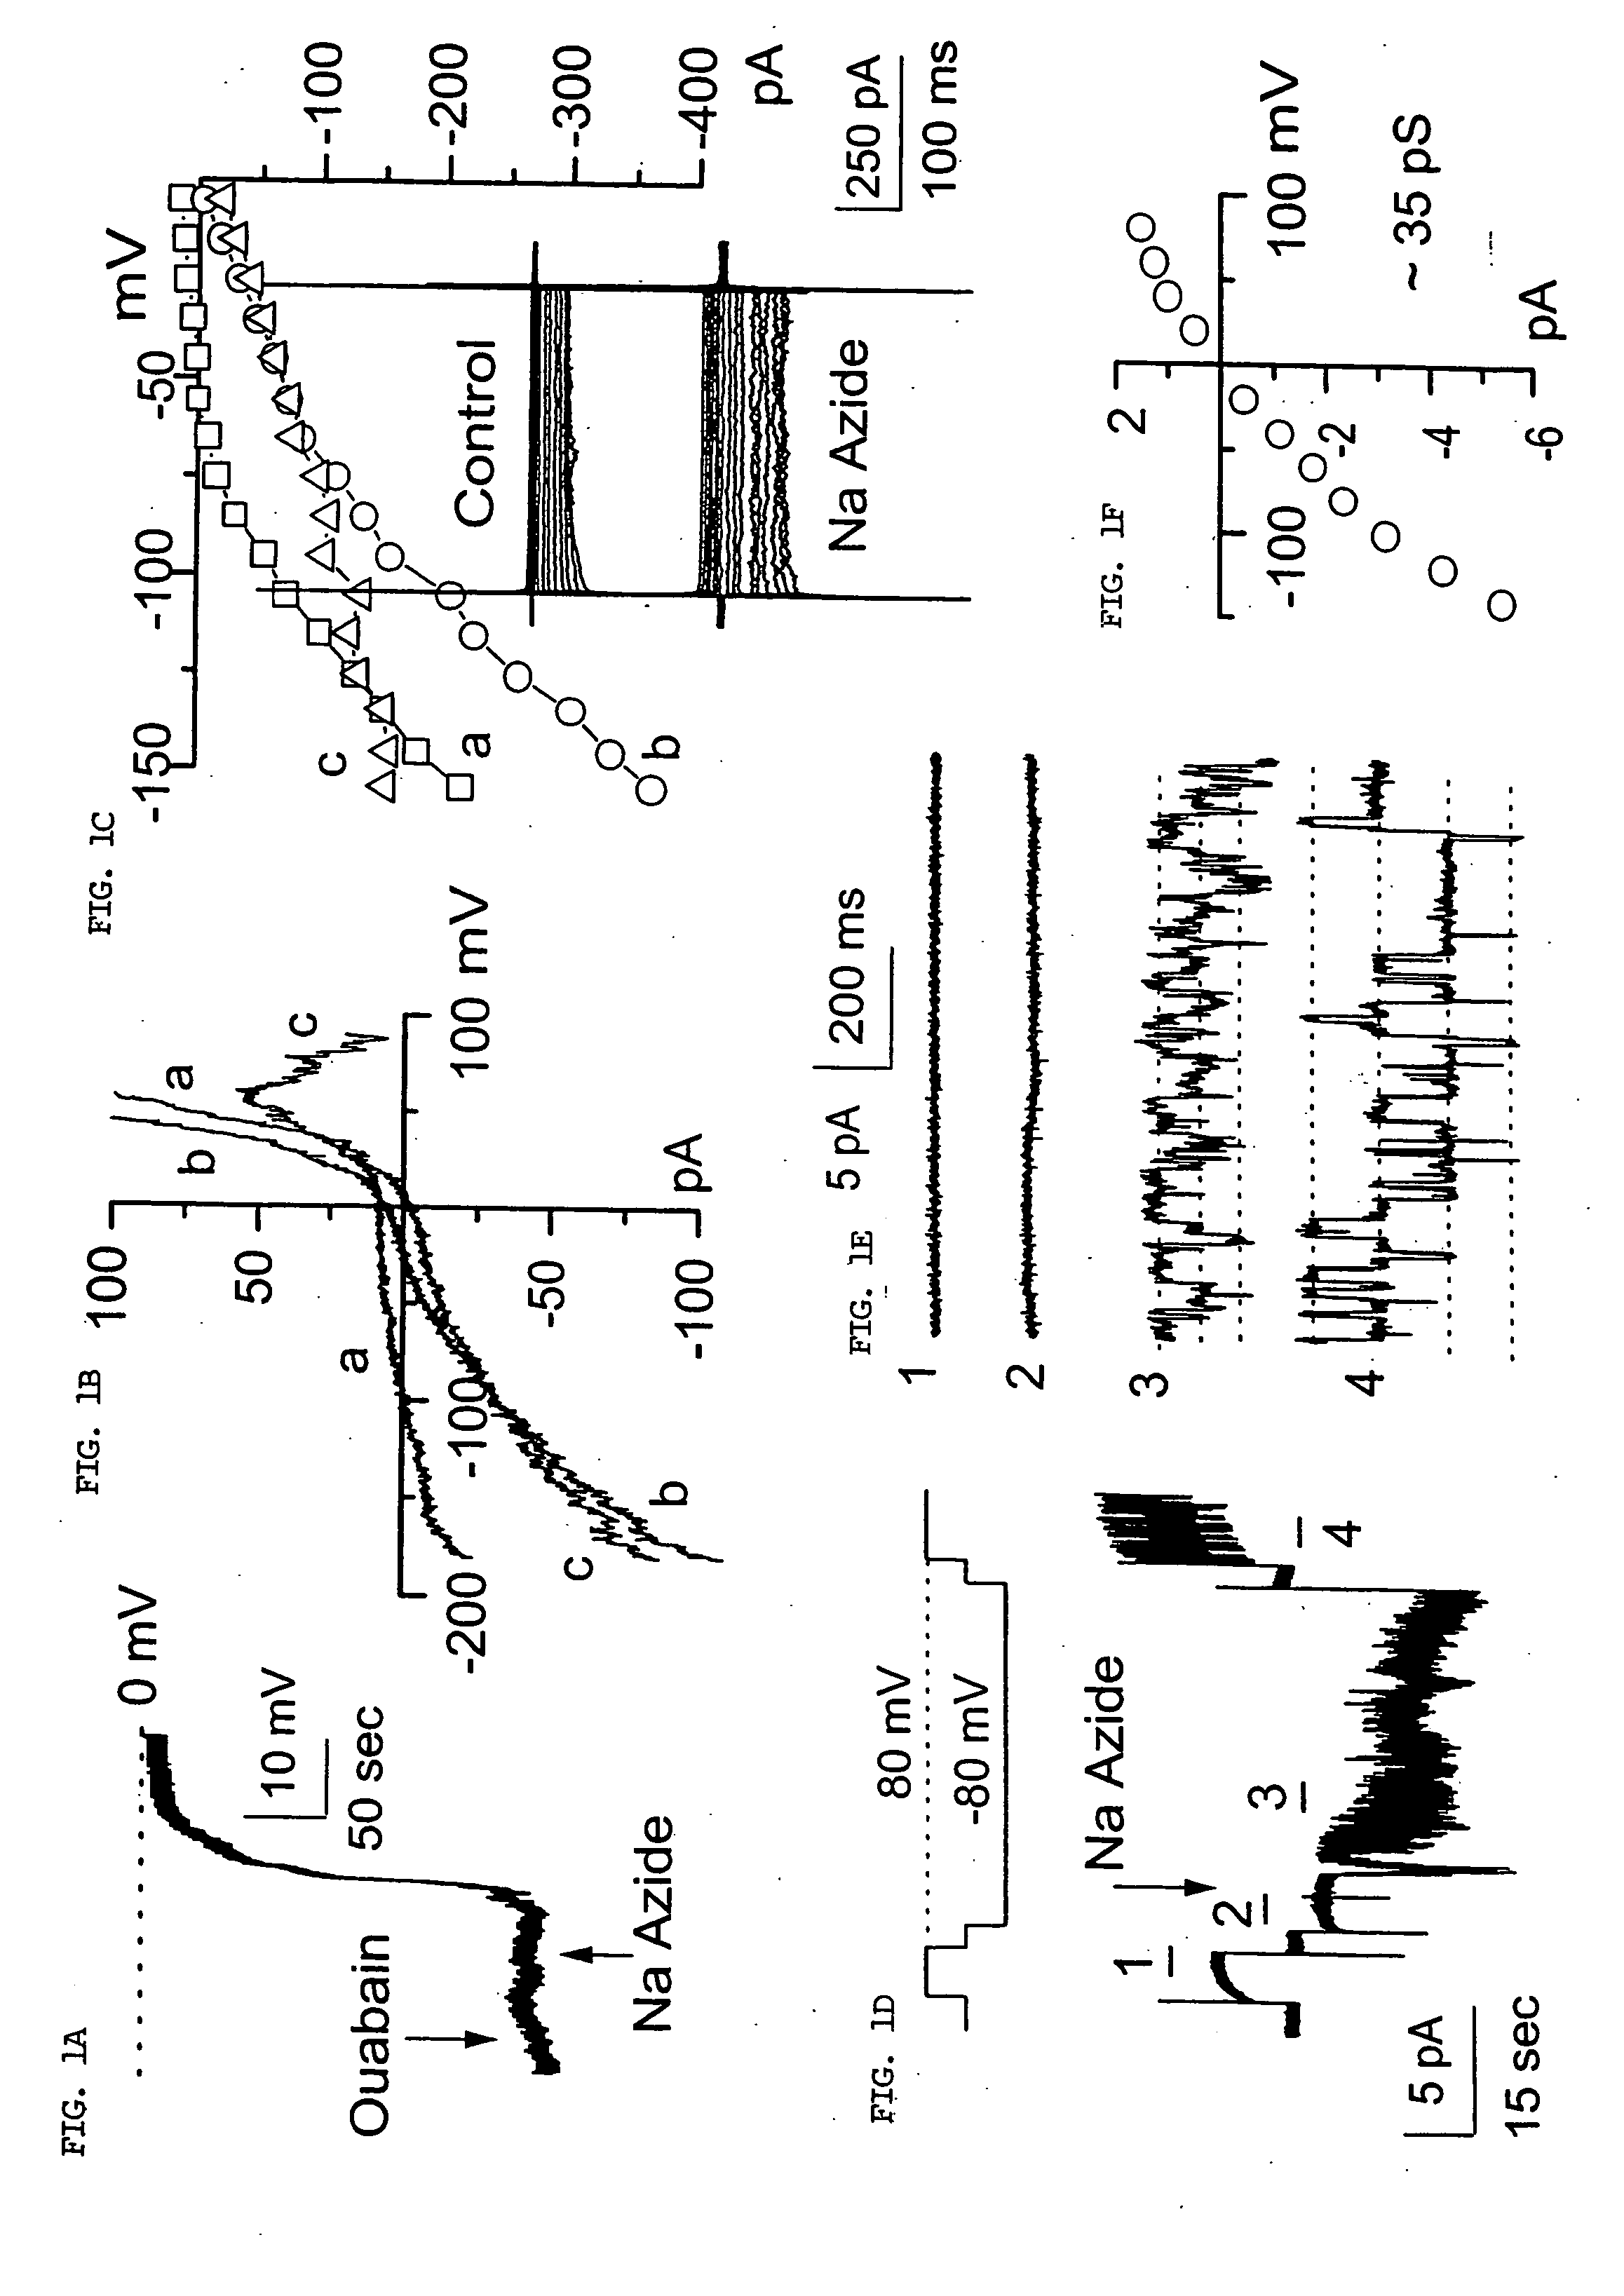 Novel non-selective cation channel in neural cells and method for treating brain swelling